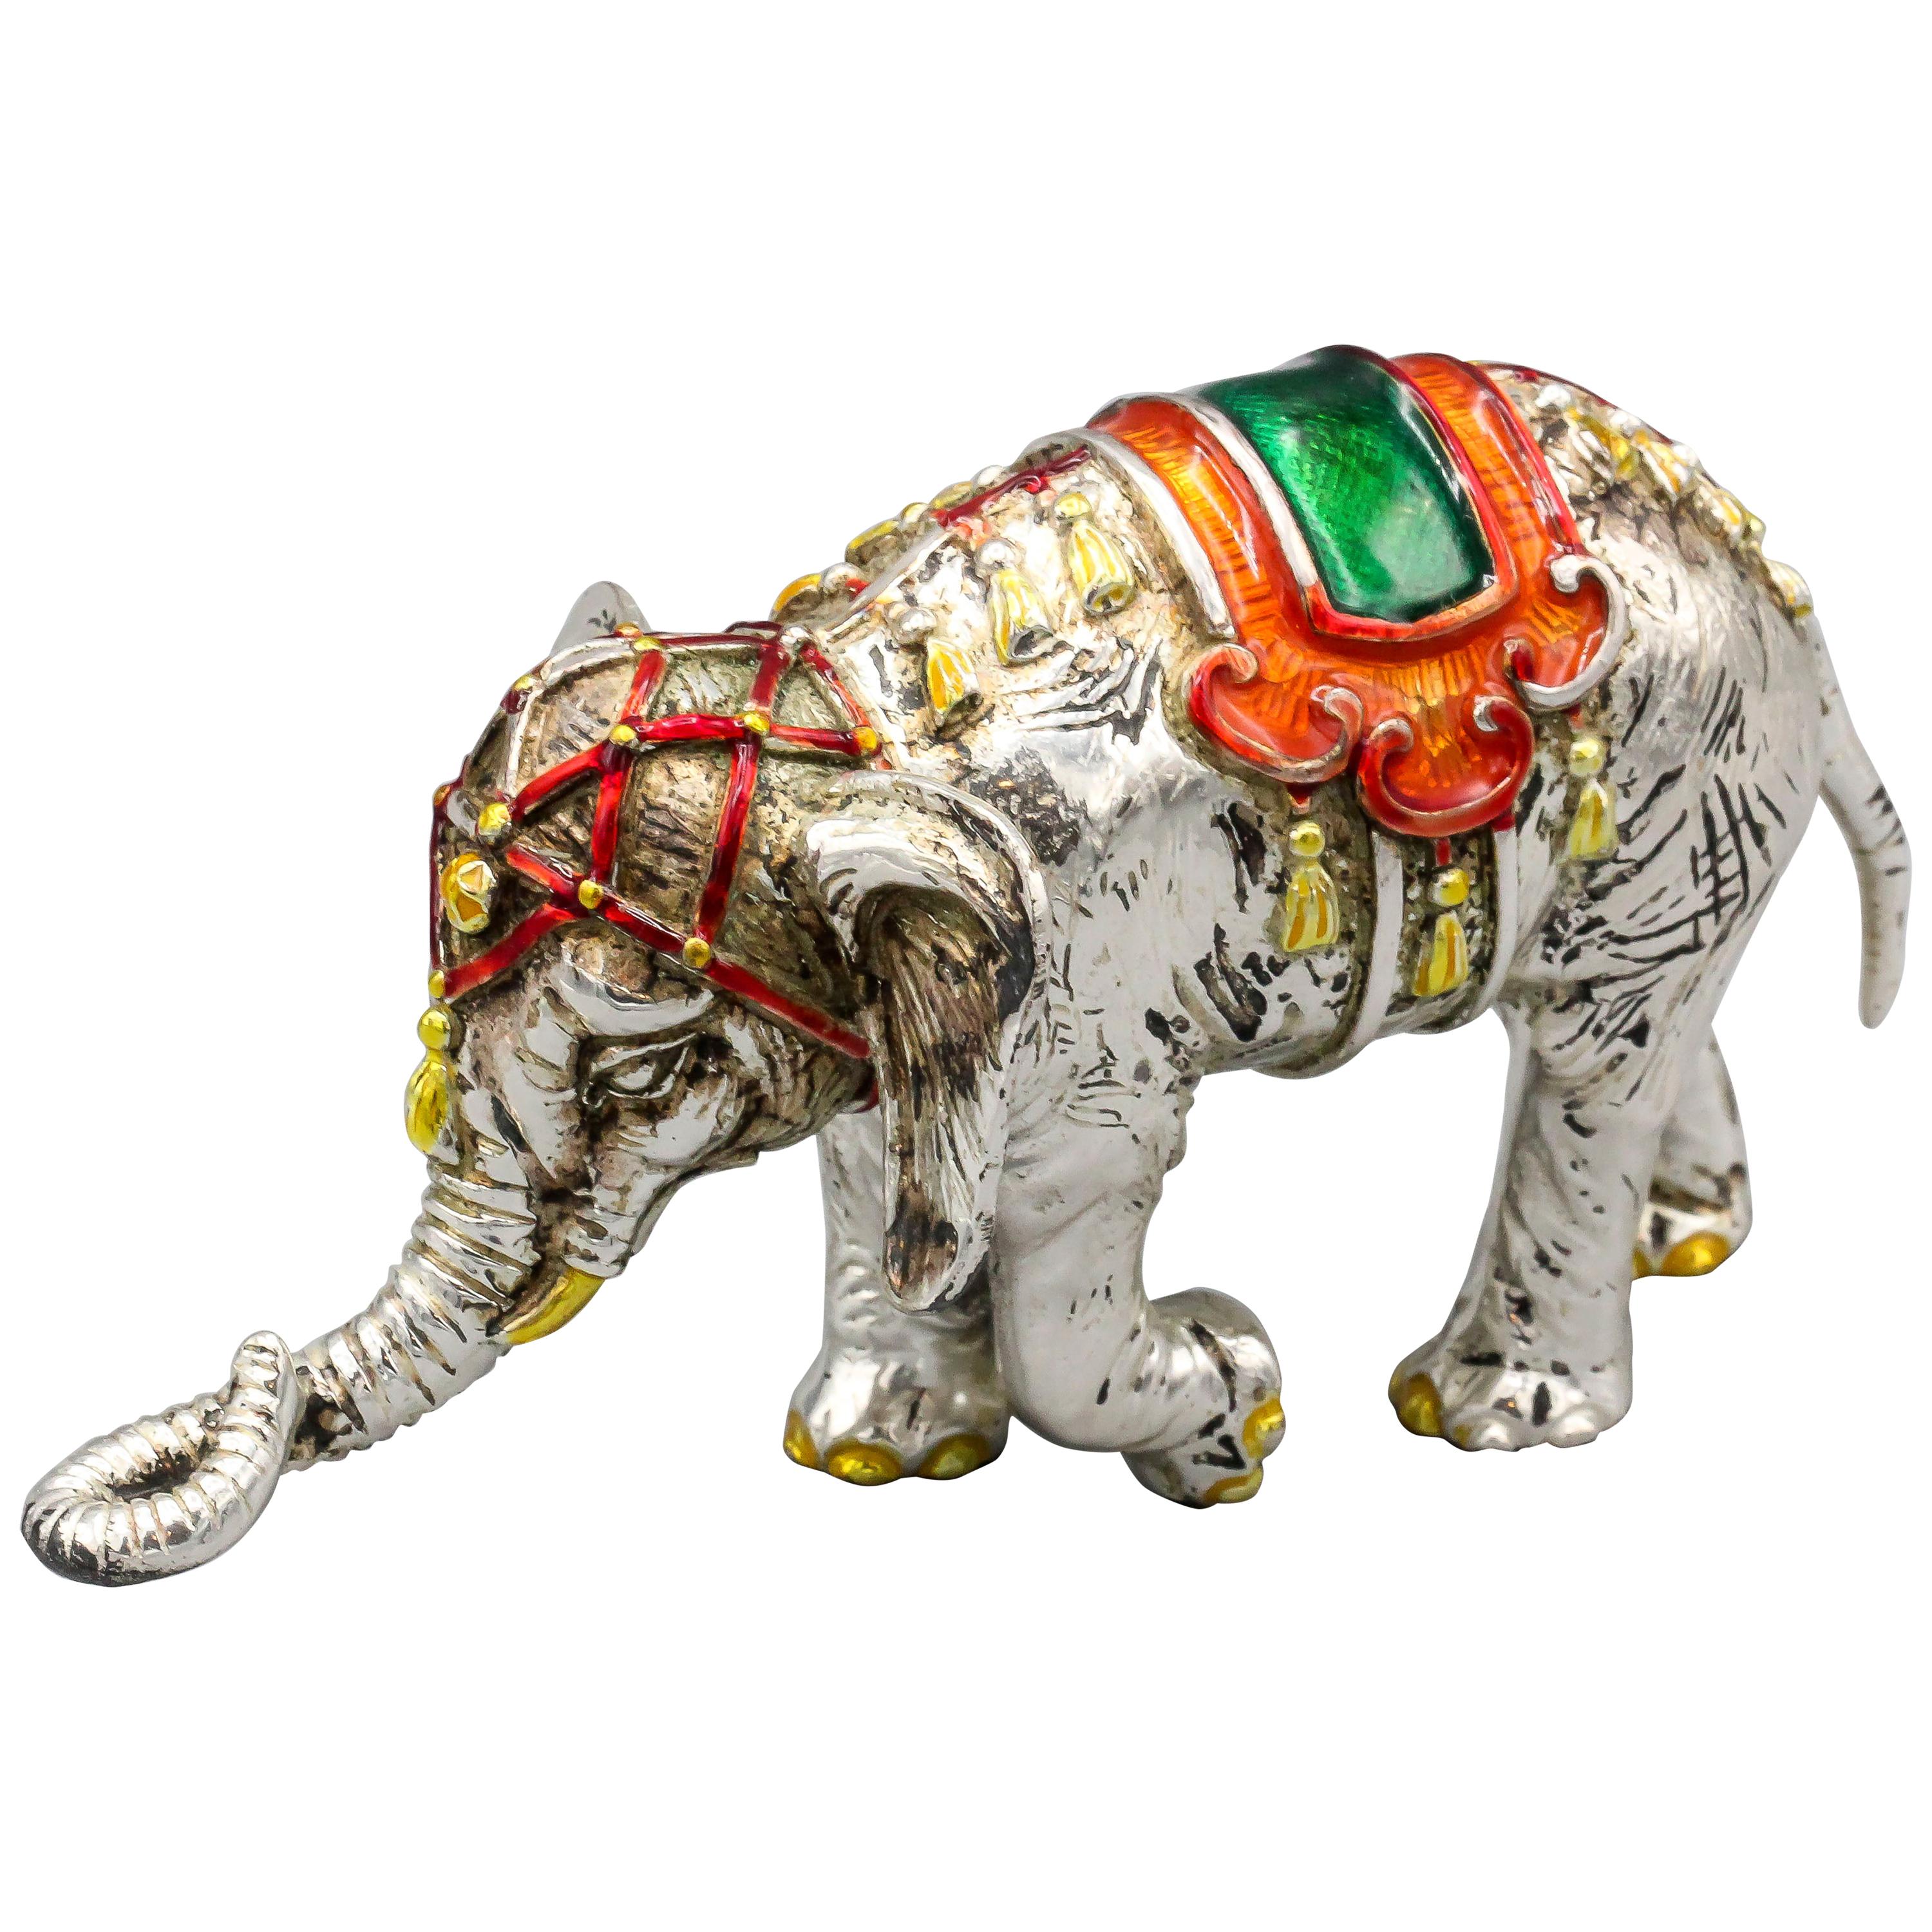 Tiffany & Co. Sterling Silver and Enamel Circus Elephant Figurine